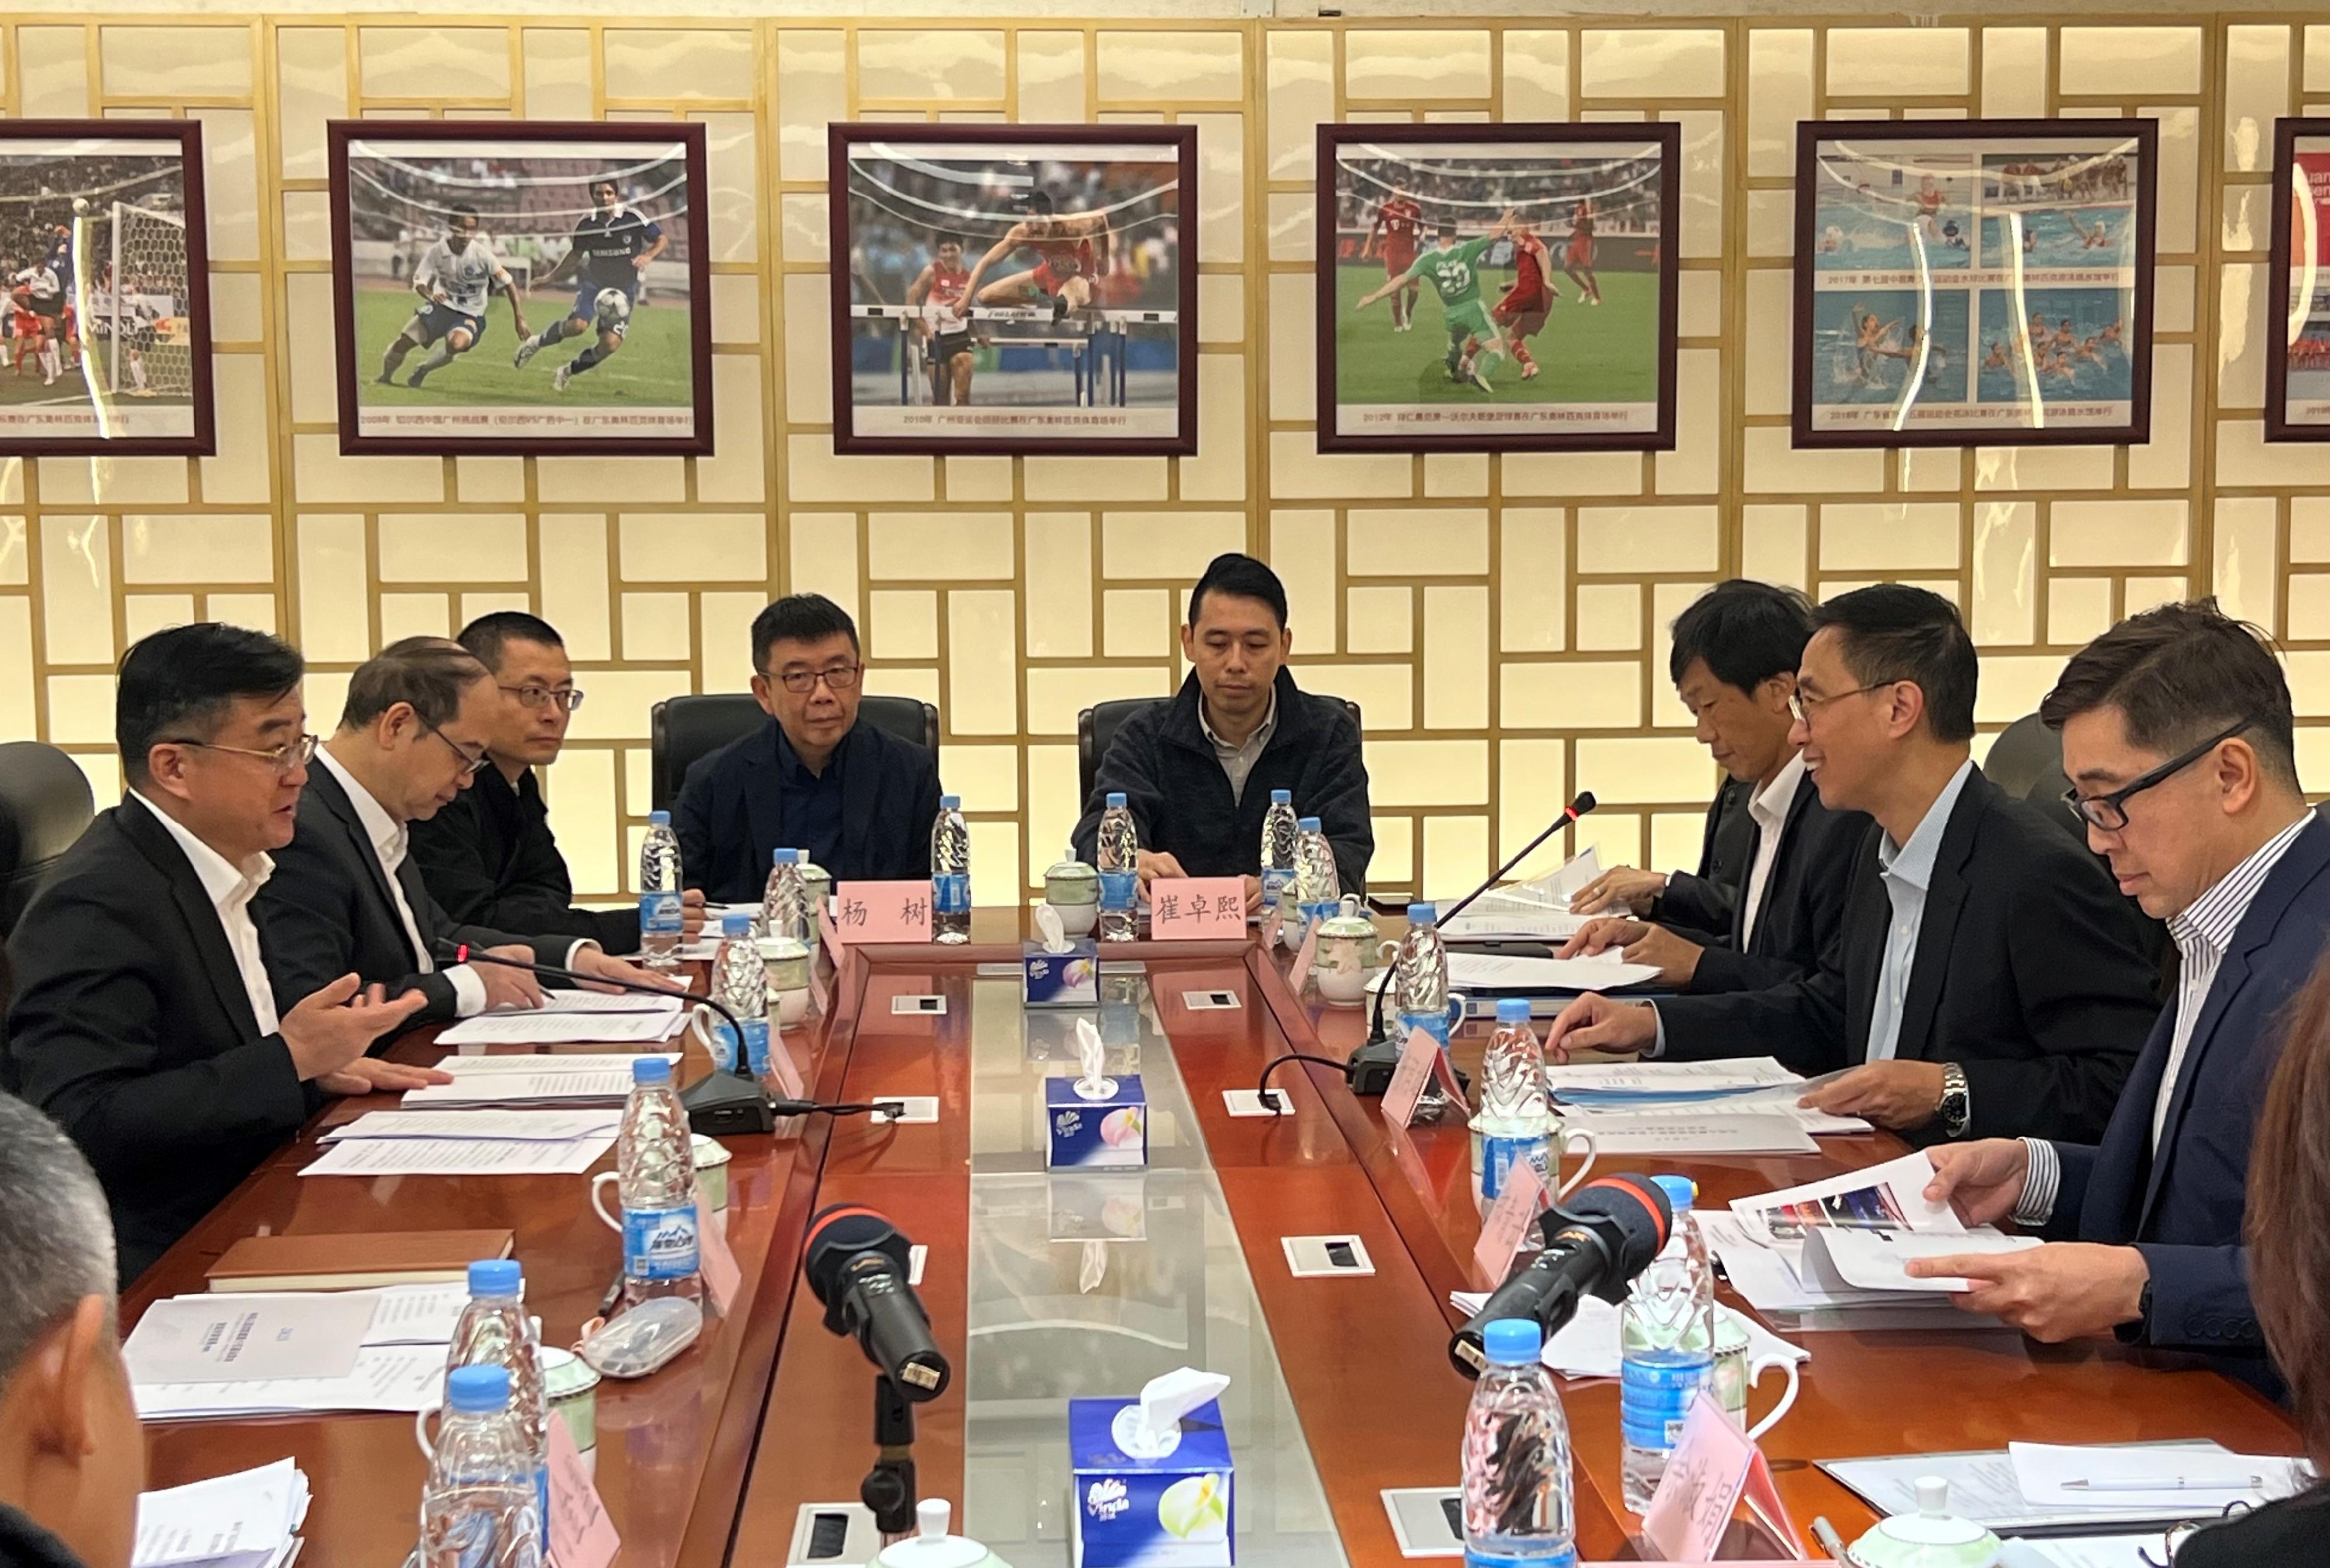 The Secretary for Culture, Sports and Tourism, Mr Kevin Yeung (second right), today (March 20) cochairs with the Head of the Sports Bureau of Guangdong Province, Mr Cui Jian (first left), a meeting in Guangzhou on the preparatory work for the 15th National Games, the 12th National Games for Persons with Disabilities and the 9th National Special Olympic Games. The Head of the National Games Coordination Office (NGCO), Mr Yeung Tak-keung (third right), and the Deputy Head of the NGCO, Mr Paul Cheng (first right), also attend the meeting.